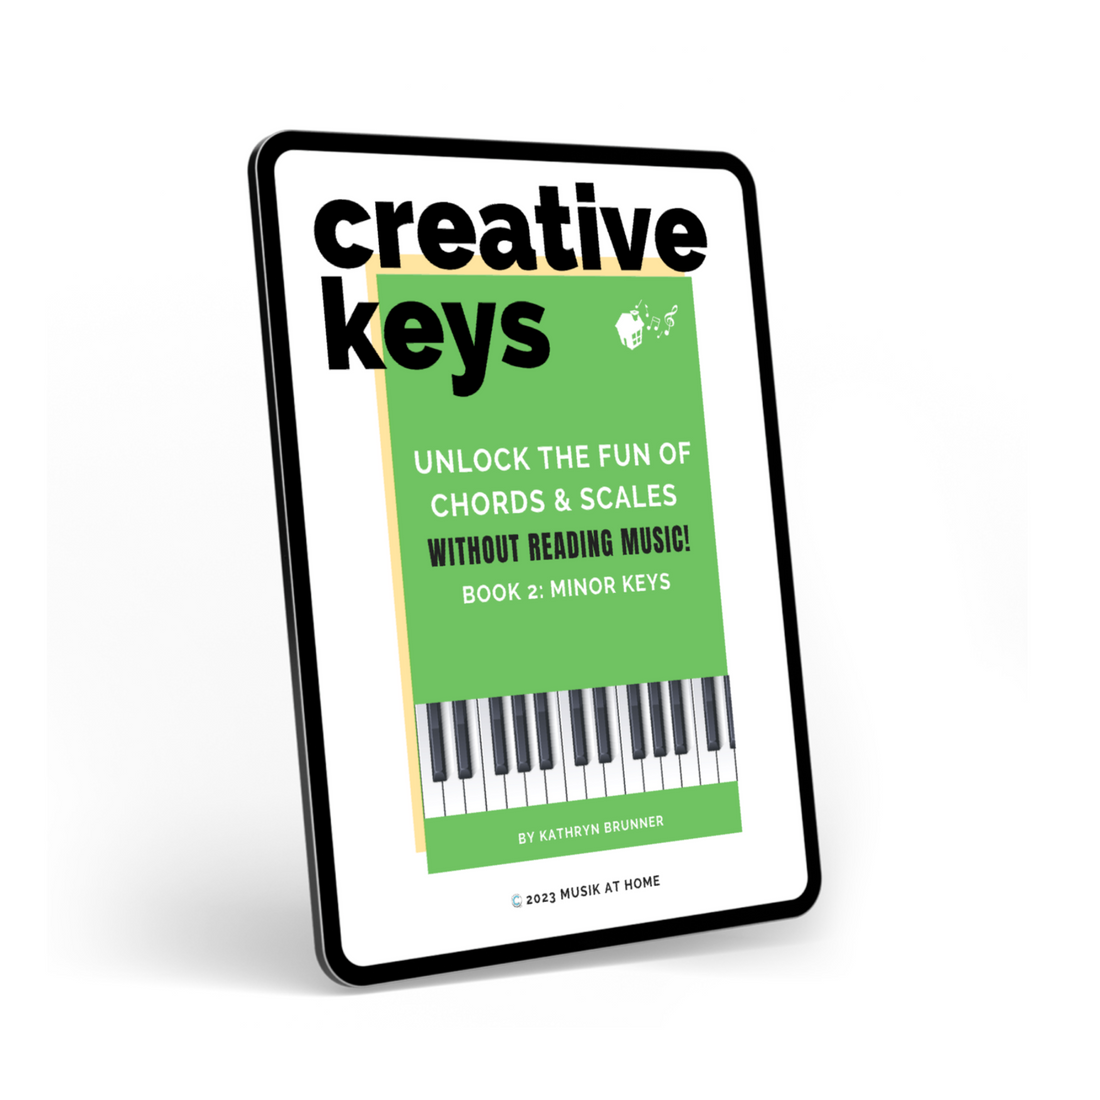 Creative Keys: Unlock the Fun of Chords & Scales without Reading Music! Book 2 - Minor Keys